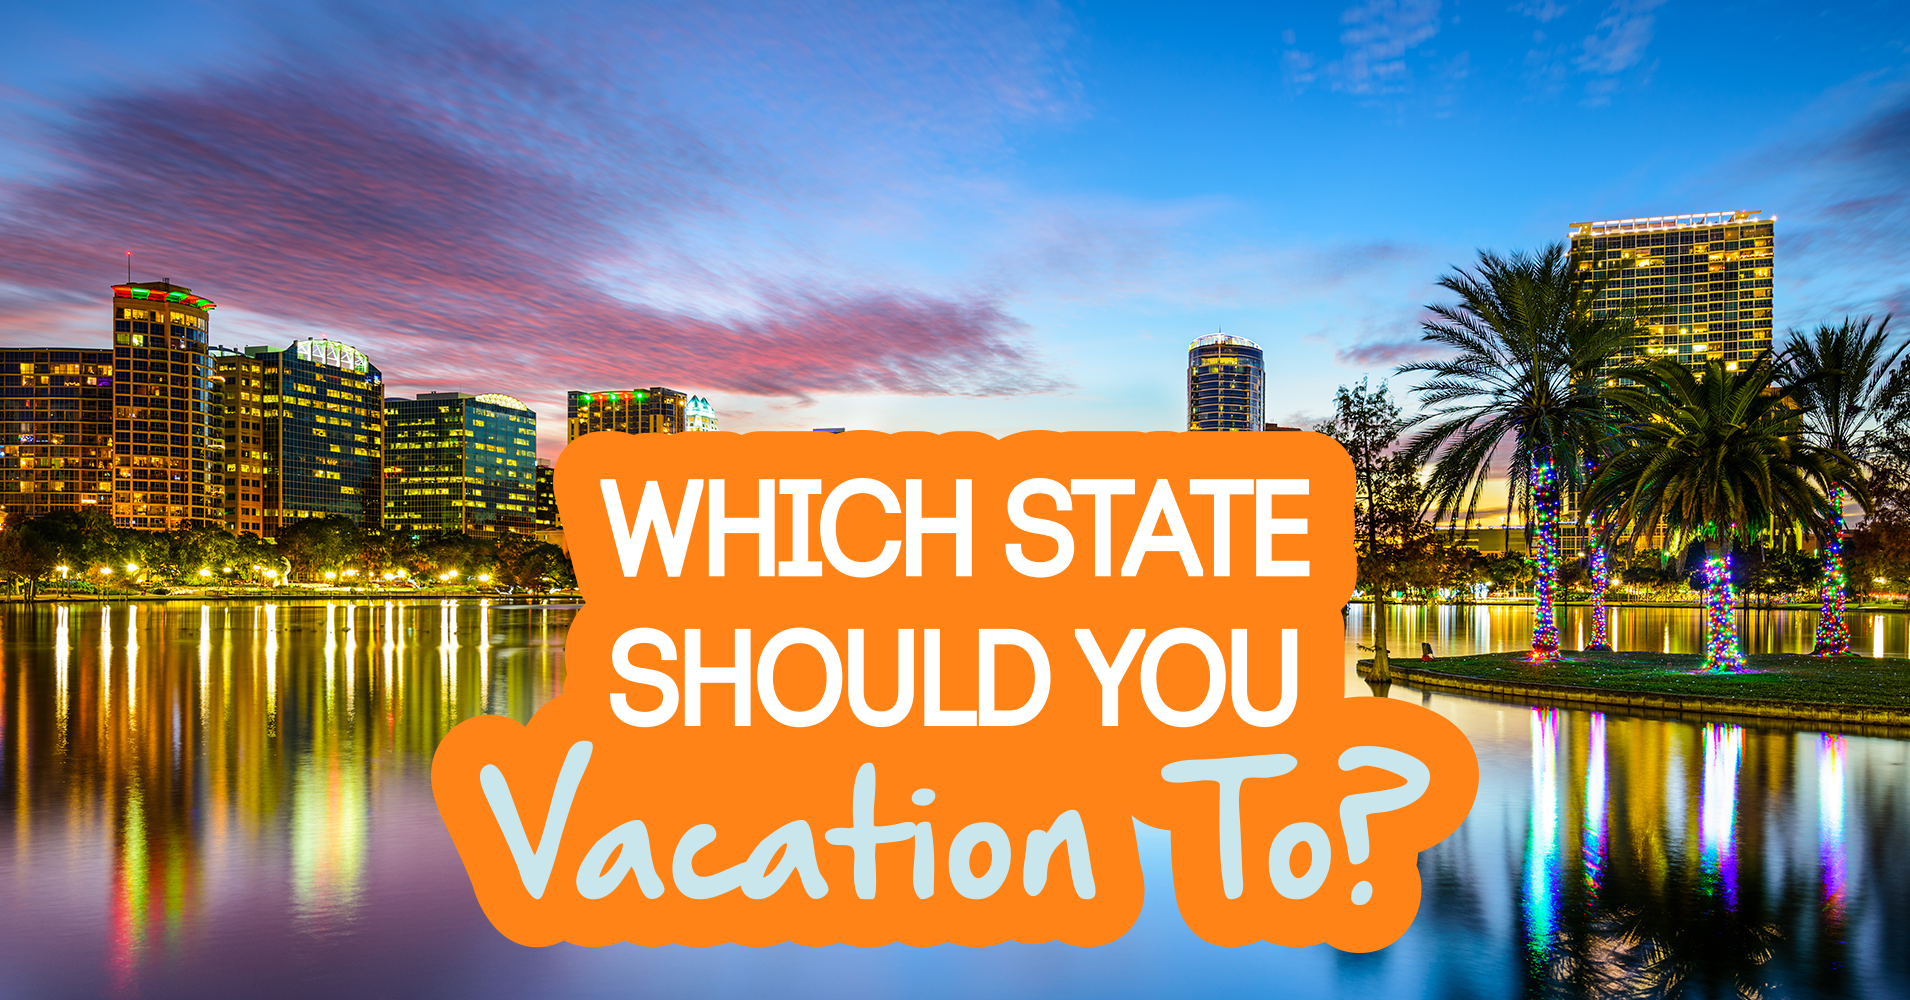 Which State Should You Vacation In? - Quiz - Quizony.com